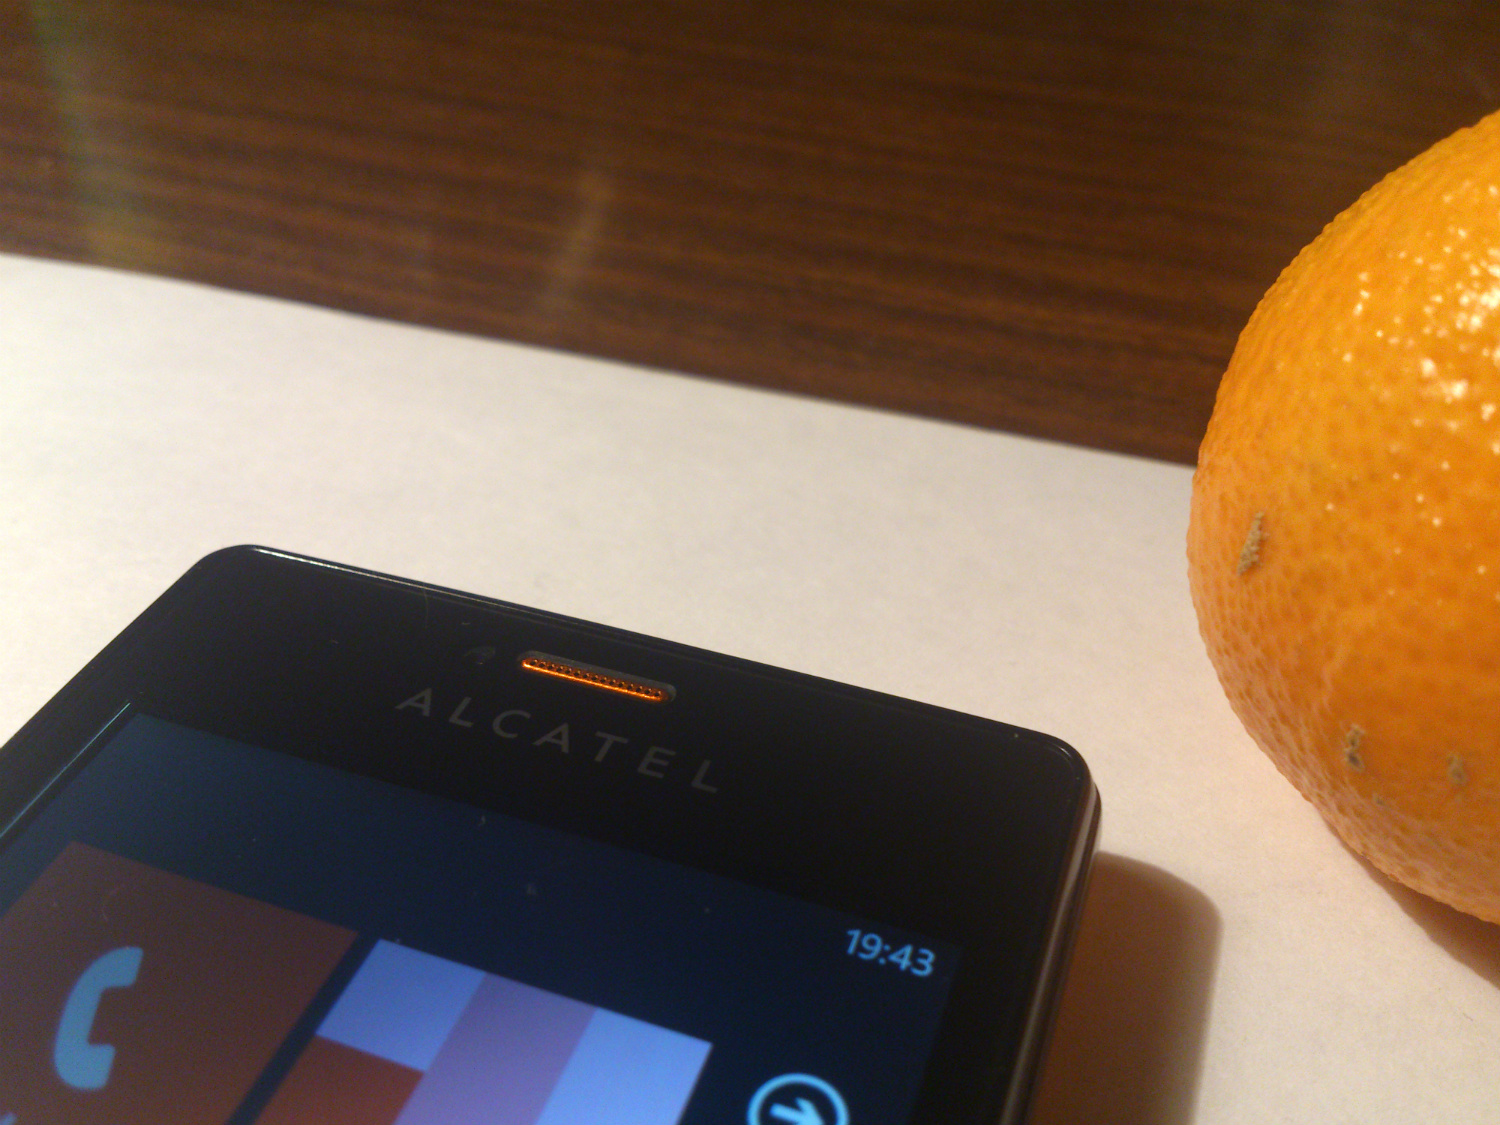 Alcatel One Touch View